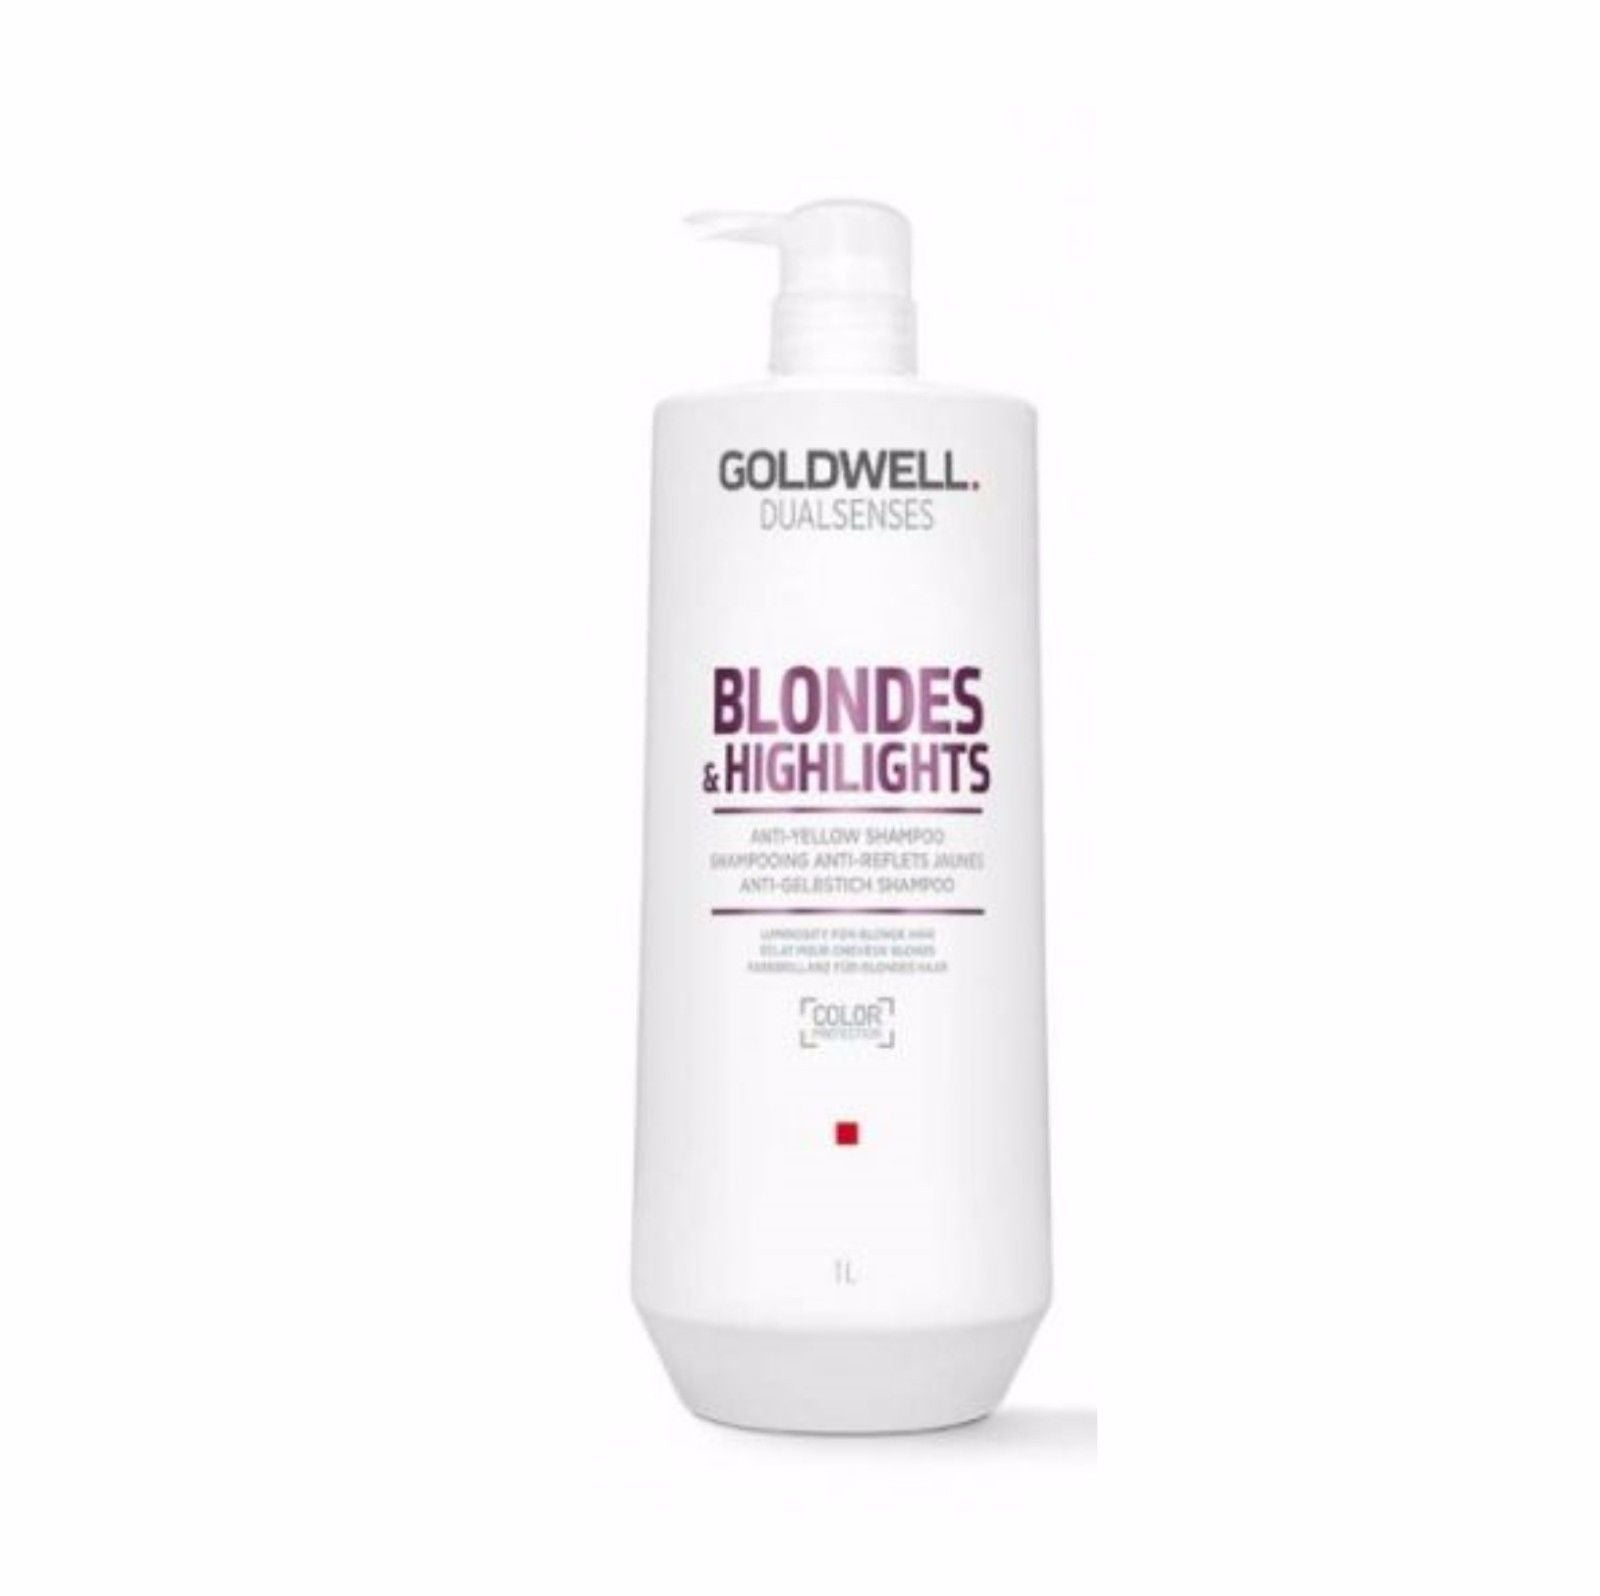 Goldwell Blondes & Highlights Anti Yellow Brassiness Shampoo 1000ml - On Line Hair Depot